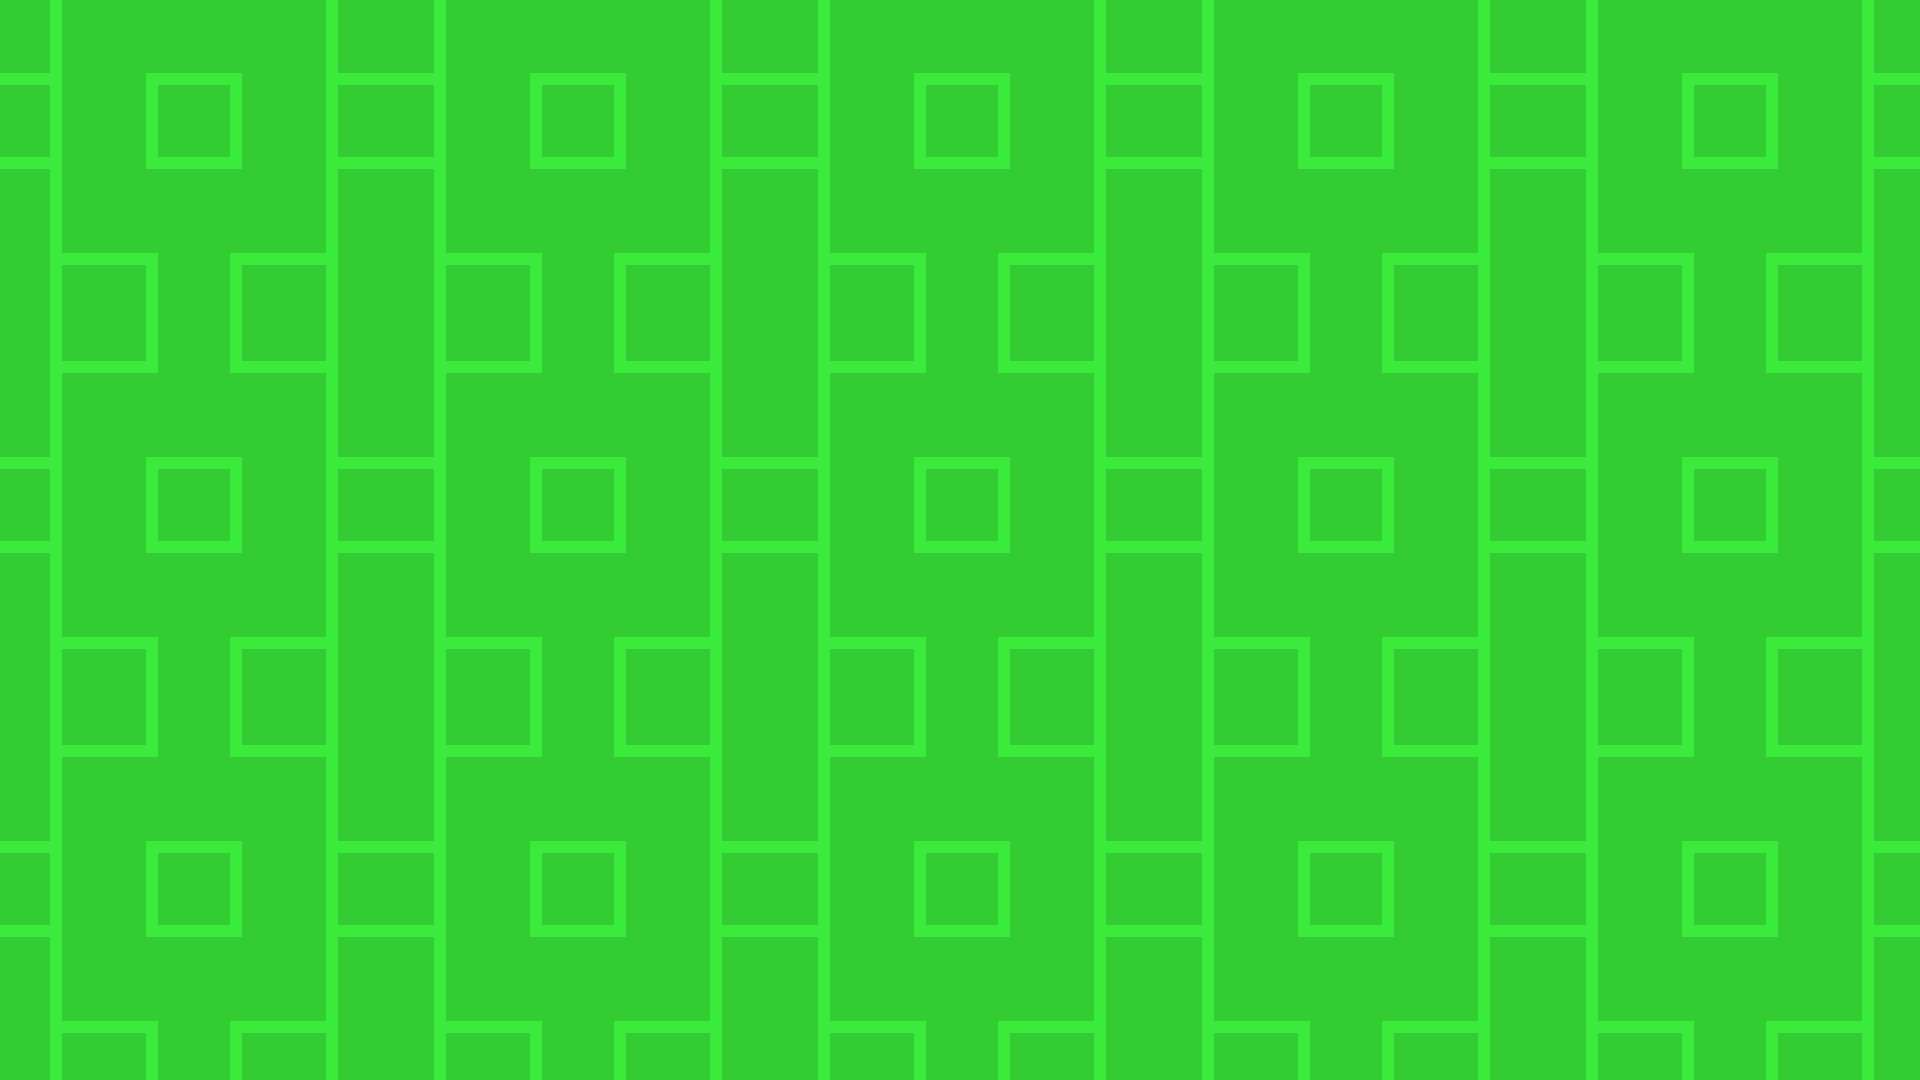 Green Square Background Image